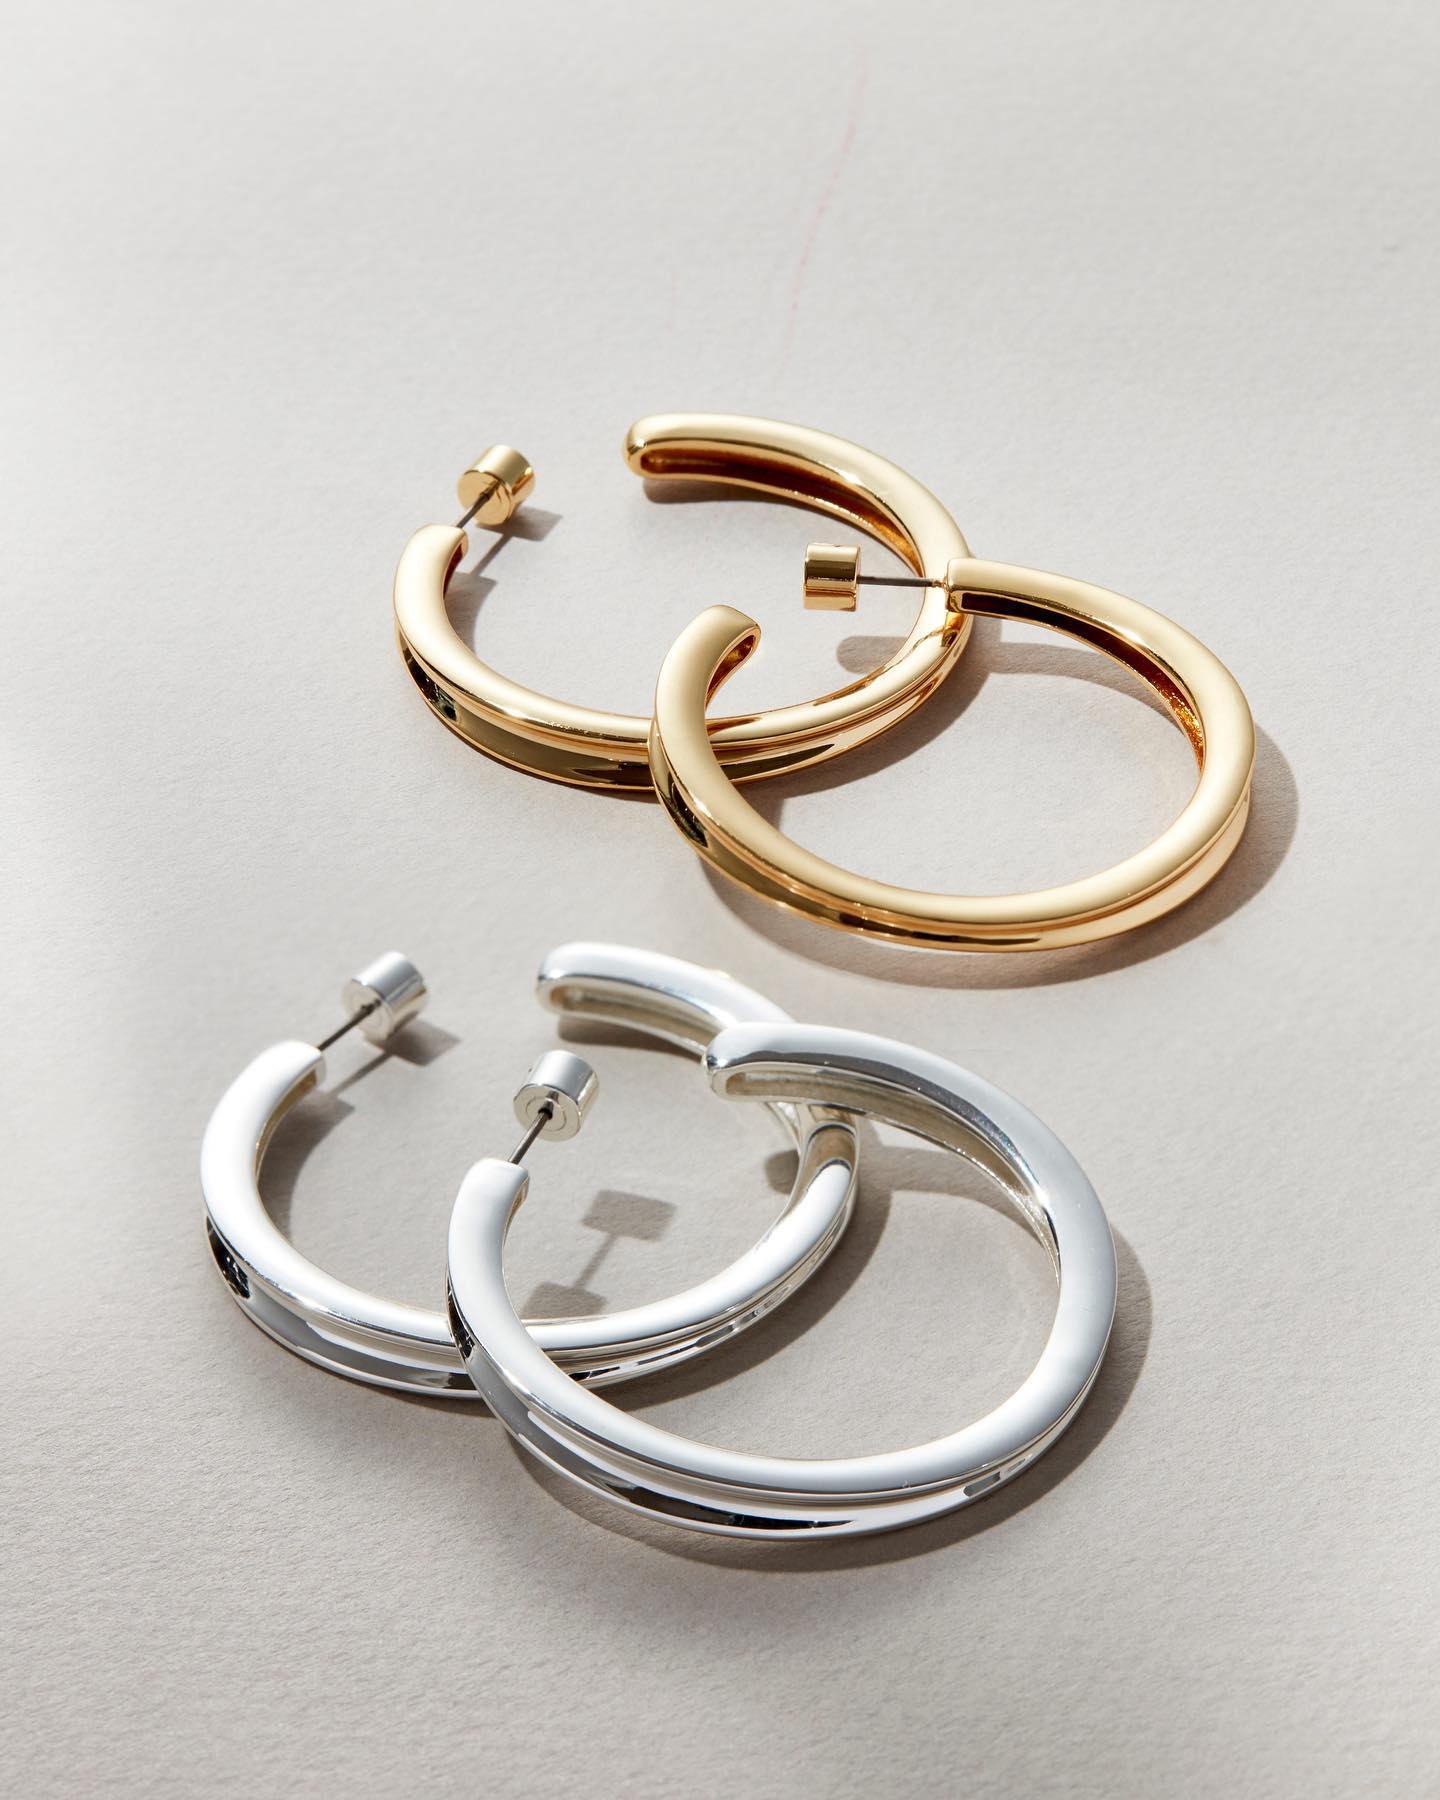 Two pairs of Jenny Bird hoop earrings are laid out. One pair is gold, the other is silver.